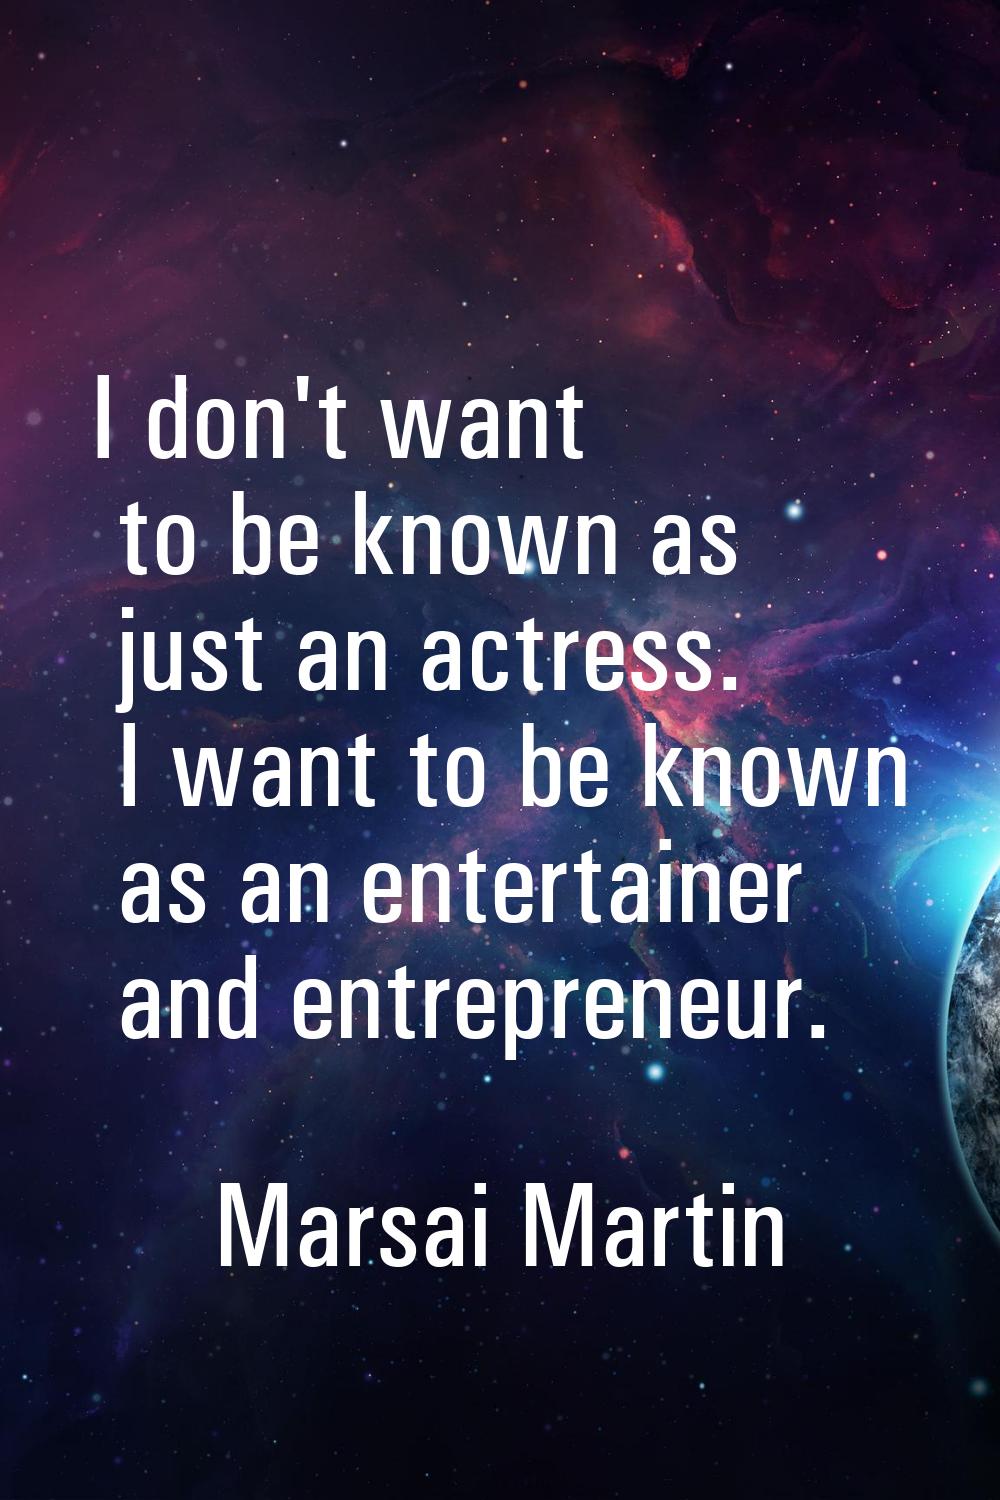 I don't want to be known as just an actress. I want to be known as an entertainer and entrepreneur.